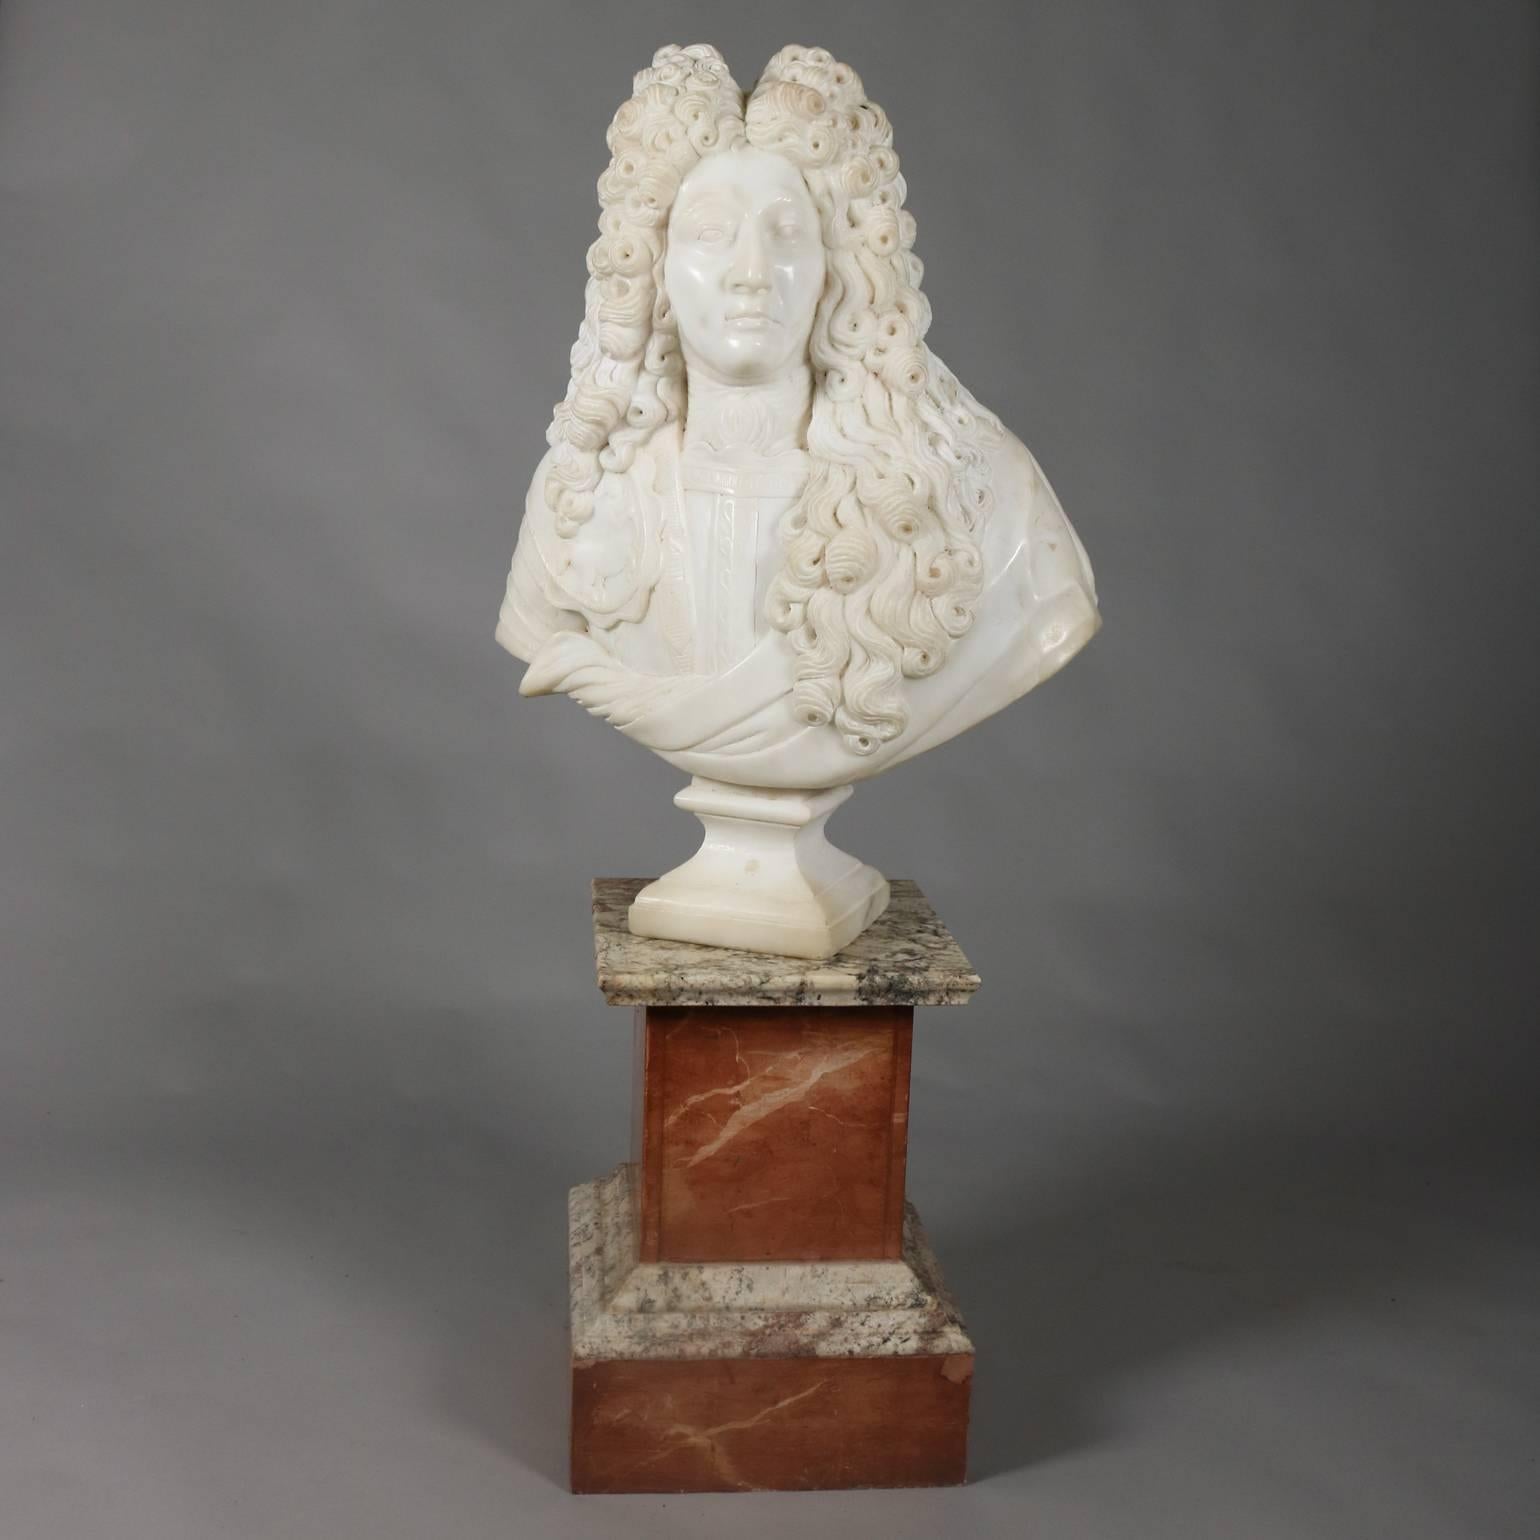 Vintage and large carved alabaster 3/4 bust sculpture of the sun king, Louis XIV, seated on marble pedestal, 20th century.

Measures: 55" H x 24" W x 14" D, overall; 35" H bust.